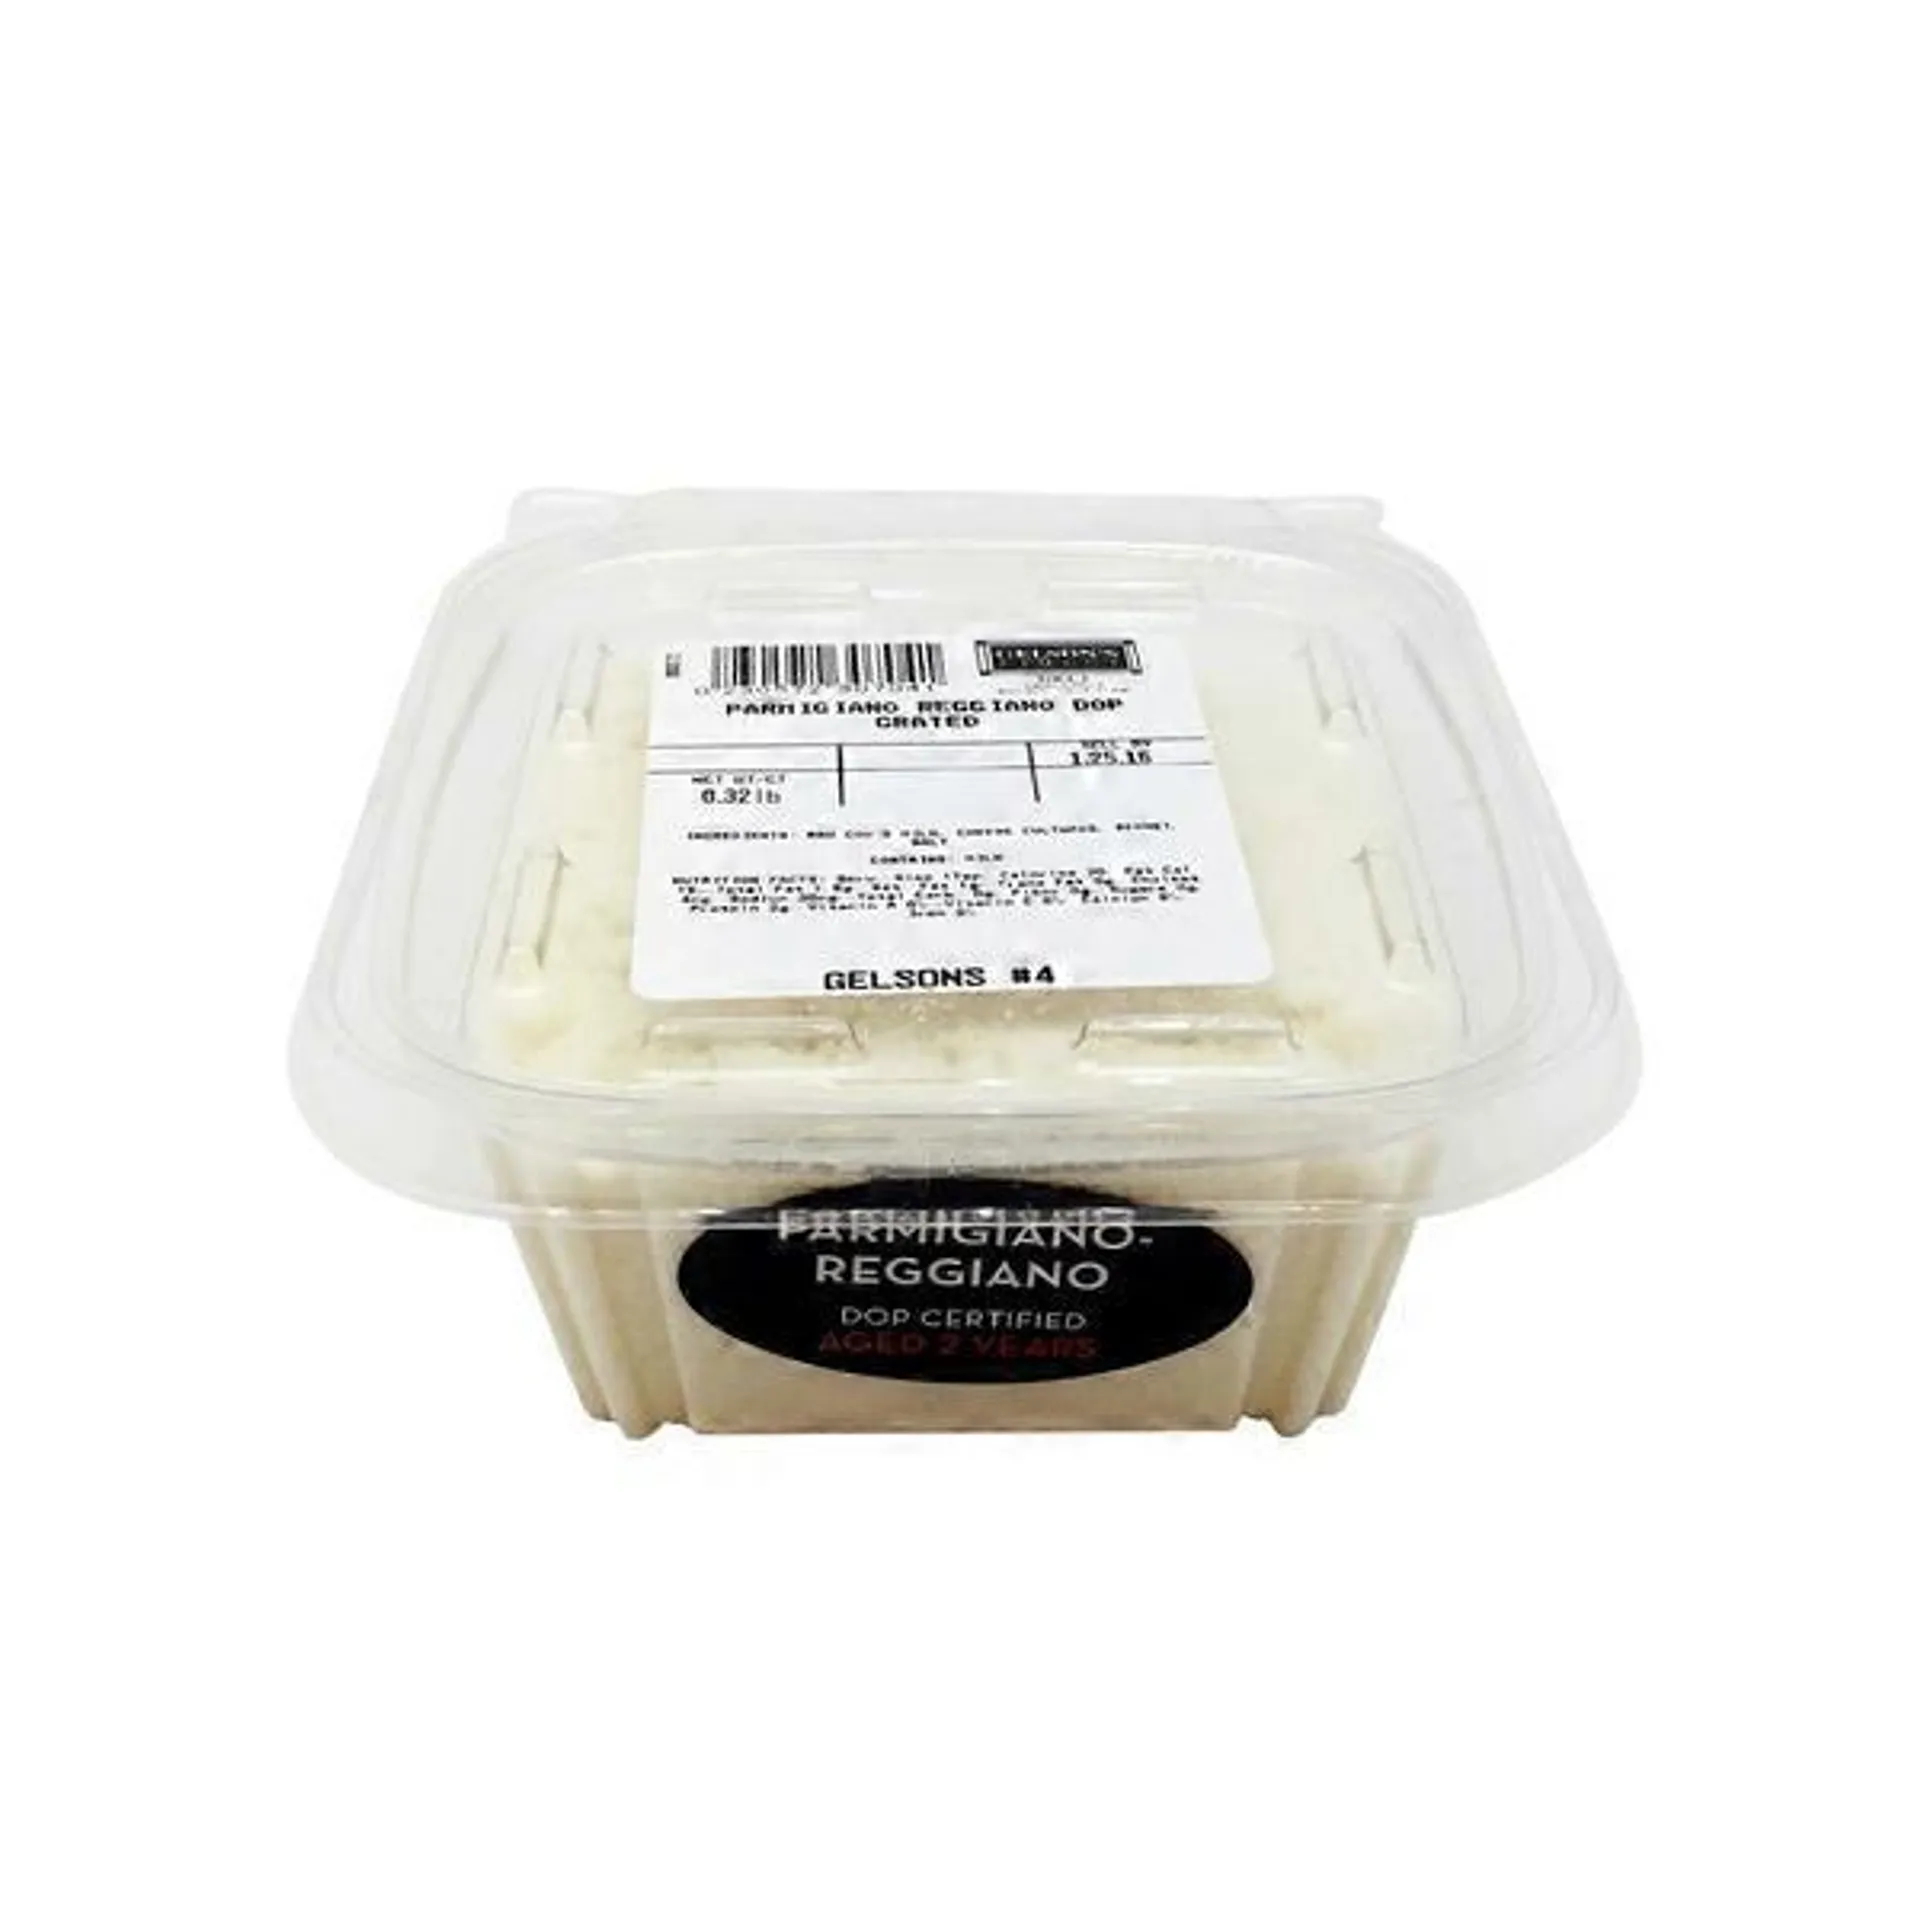 Gelson's Parmigiano Reggiano DOP Grated Cheese